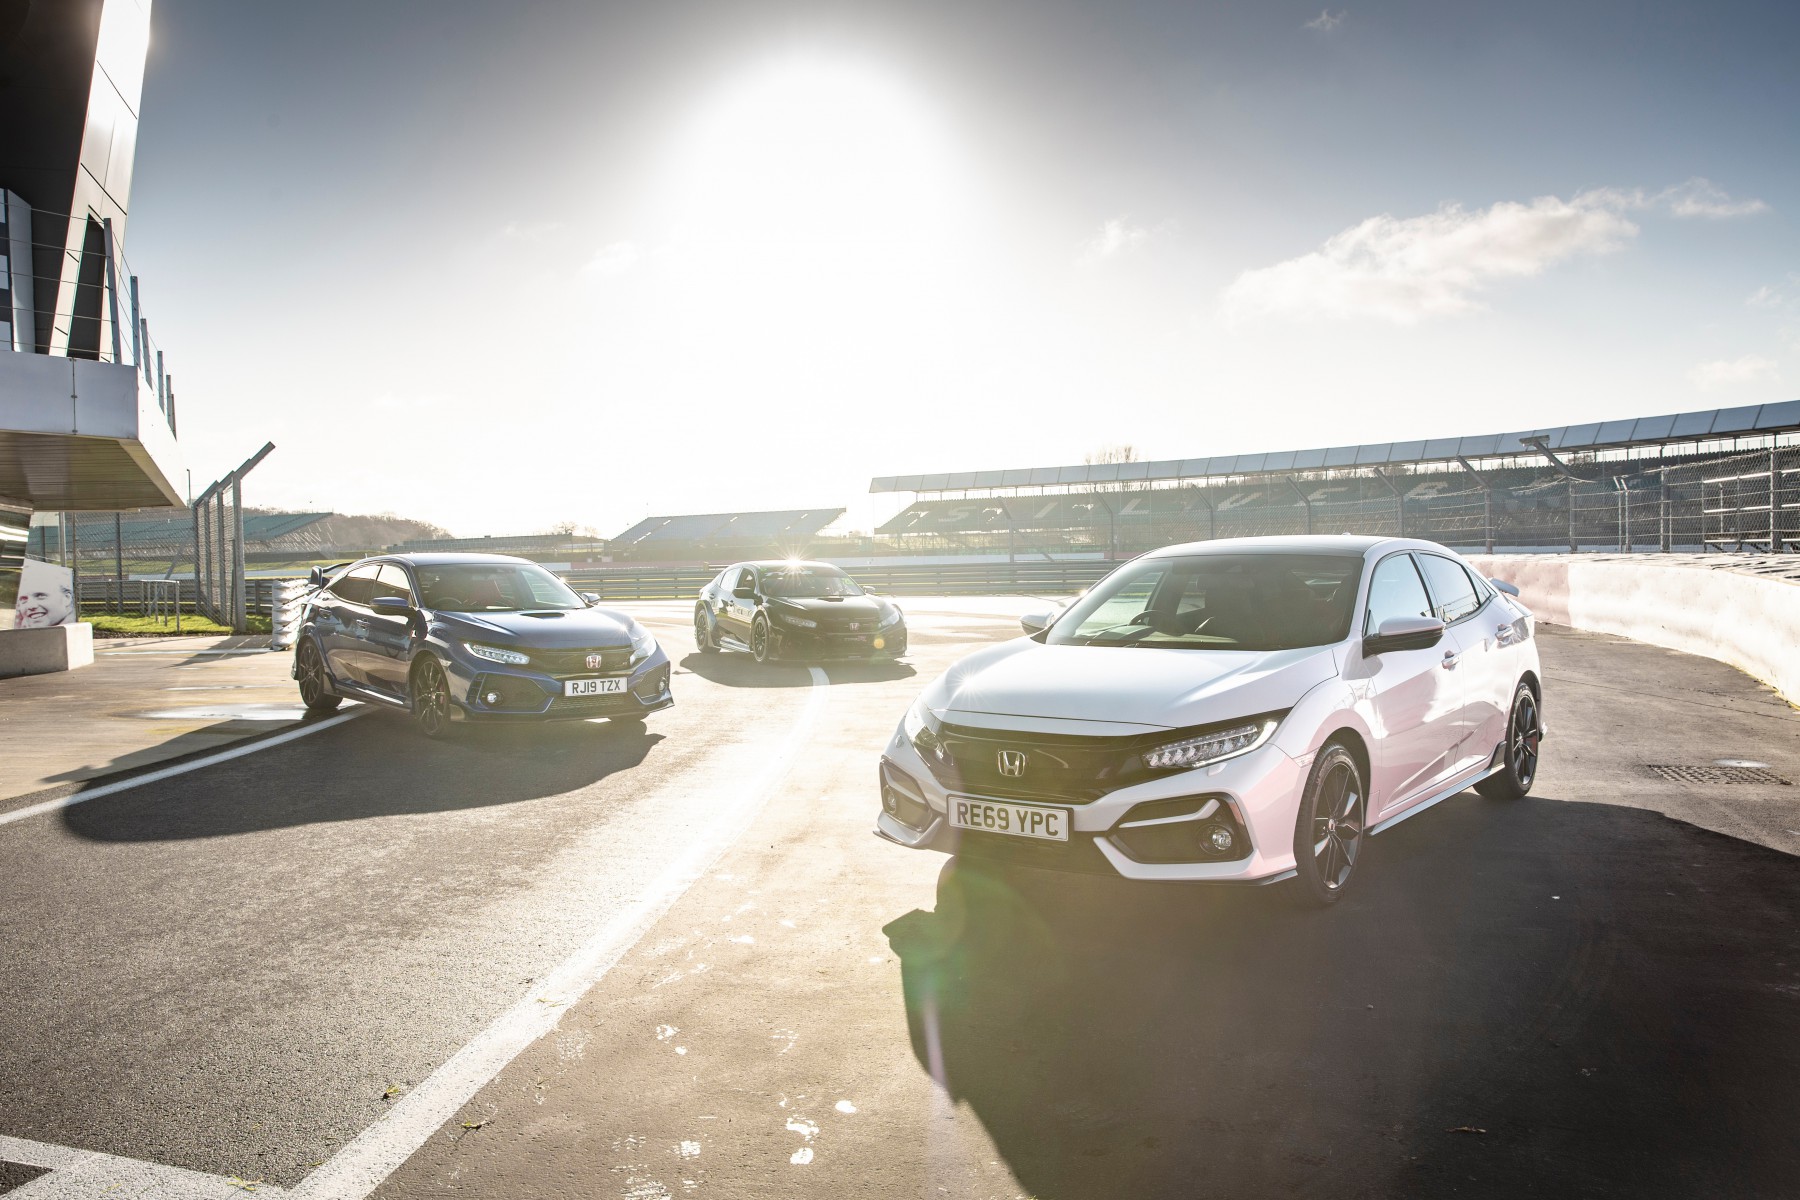 The Honda Type R Road Car, Type R Race Car and Civic Ex Sportline